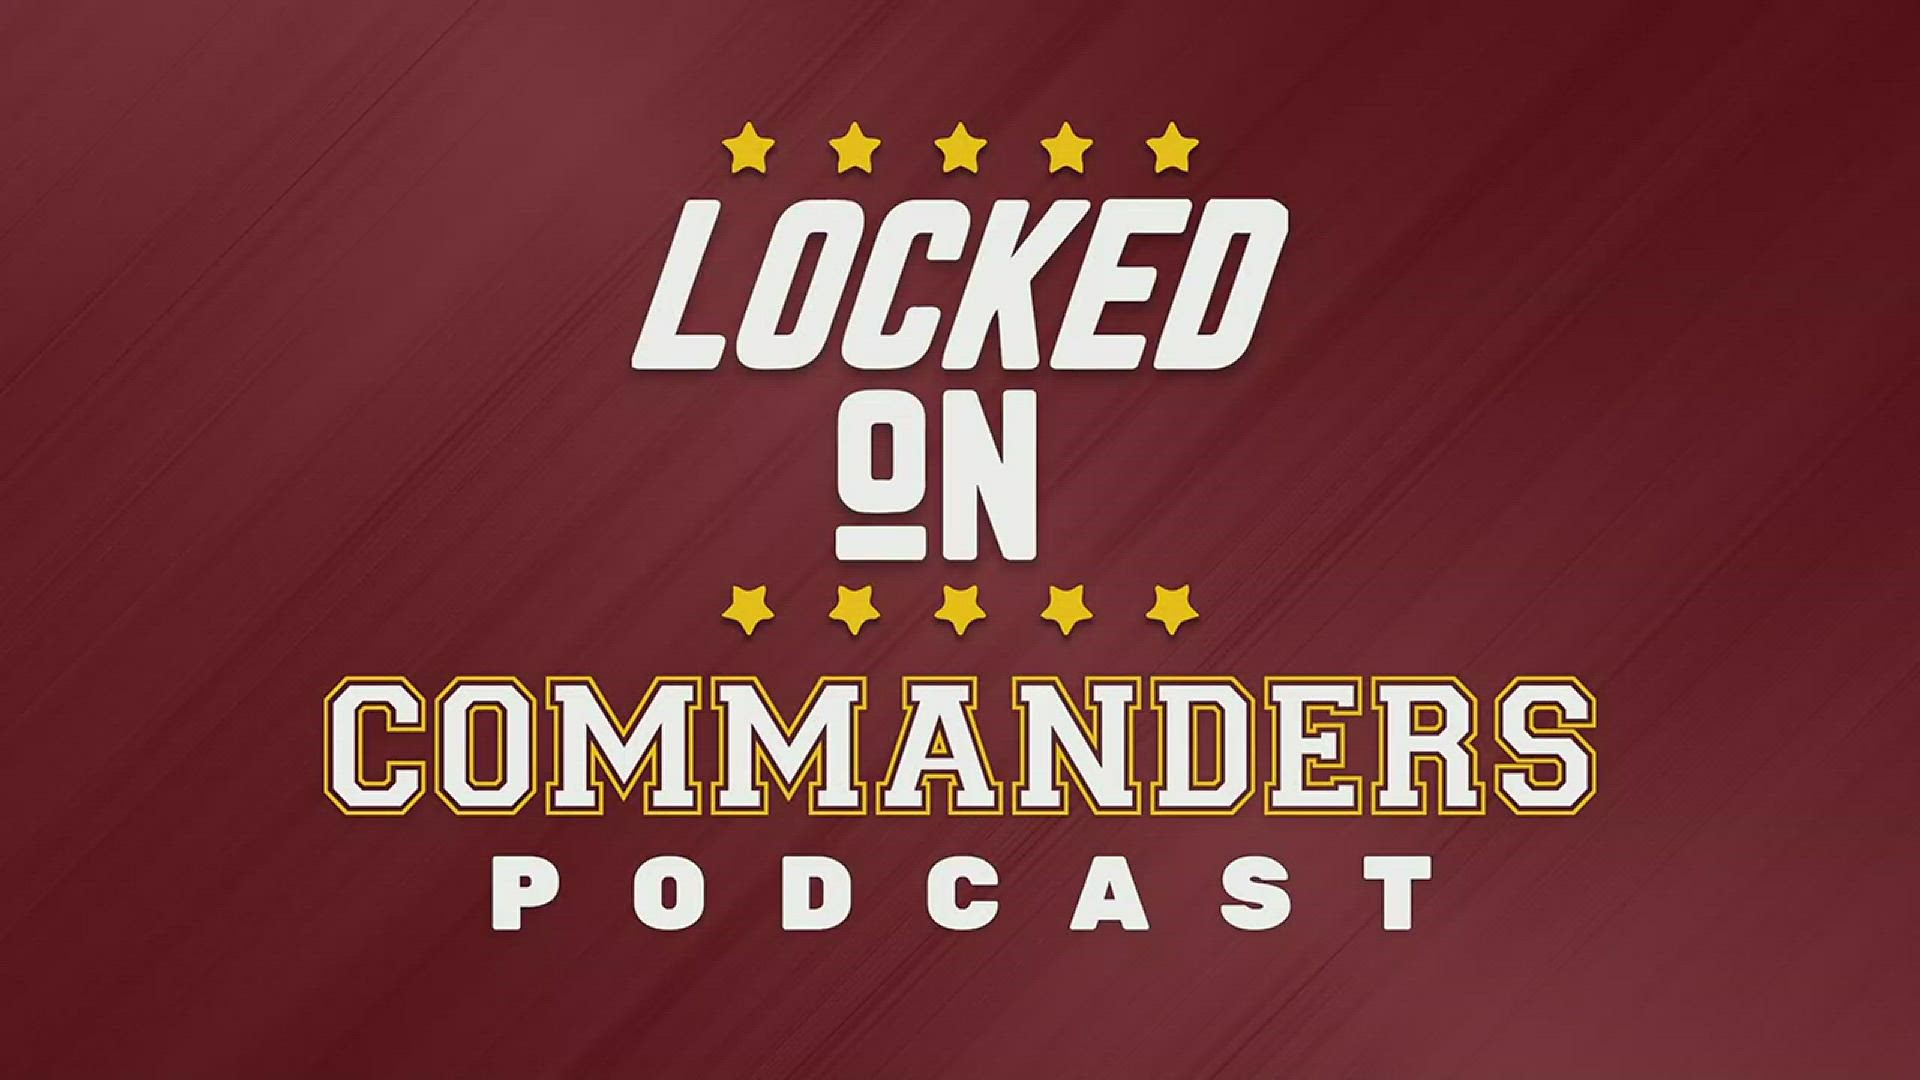 Training camp starts and the Locked On Commanders podcast discusses Washington's linebacker depth after comments by coach Ron Rivera.